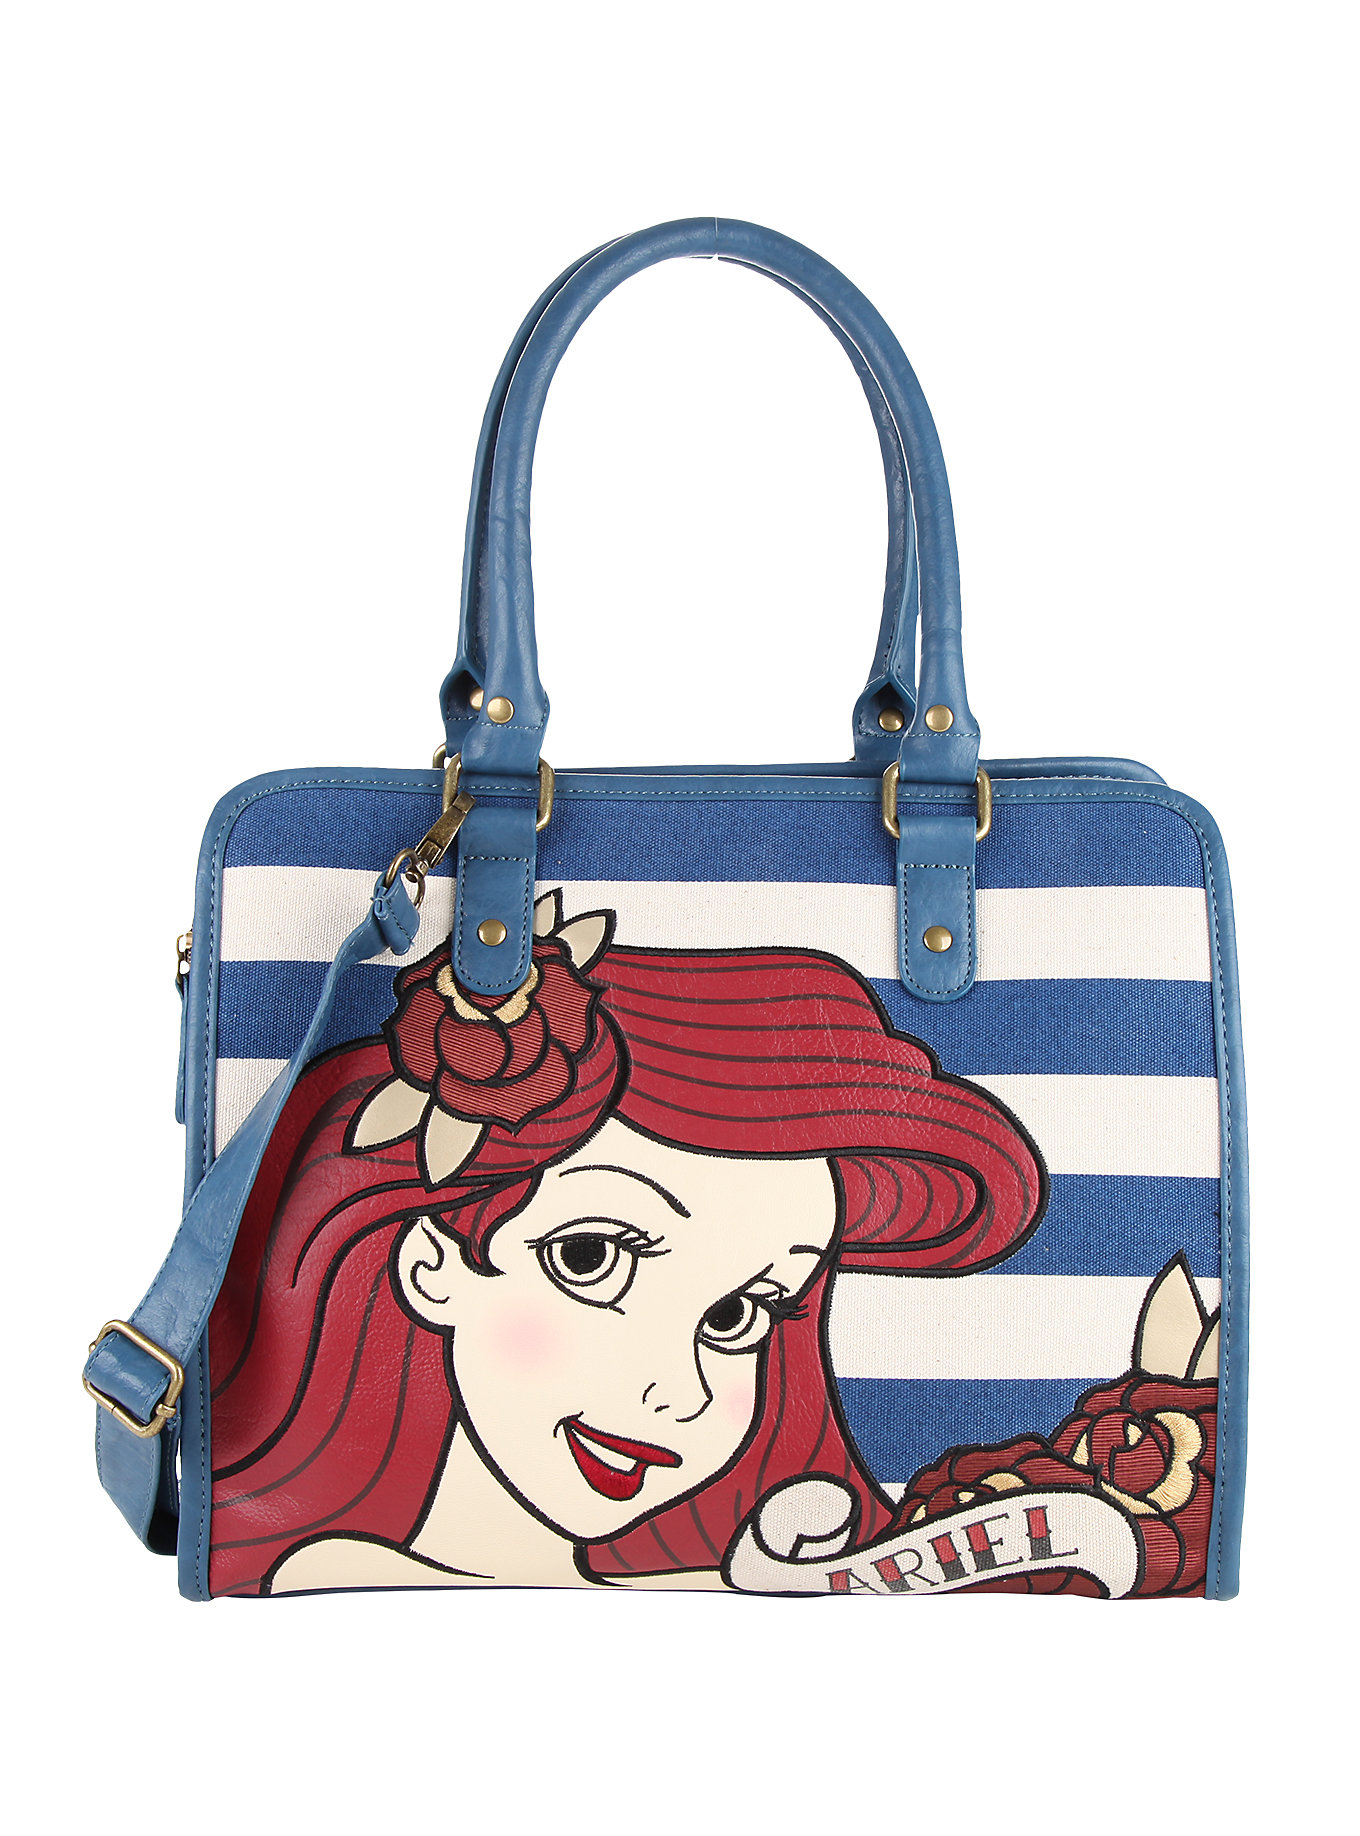 Sites-hottopic-Site | Backpacks, Purses and bags, Bags